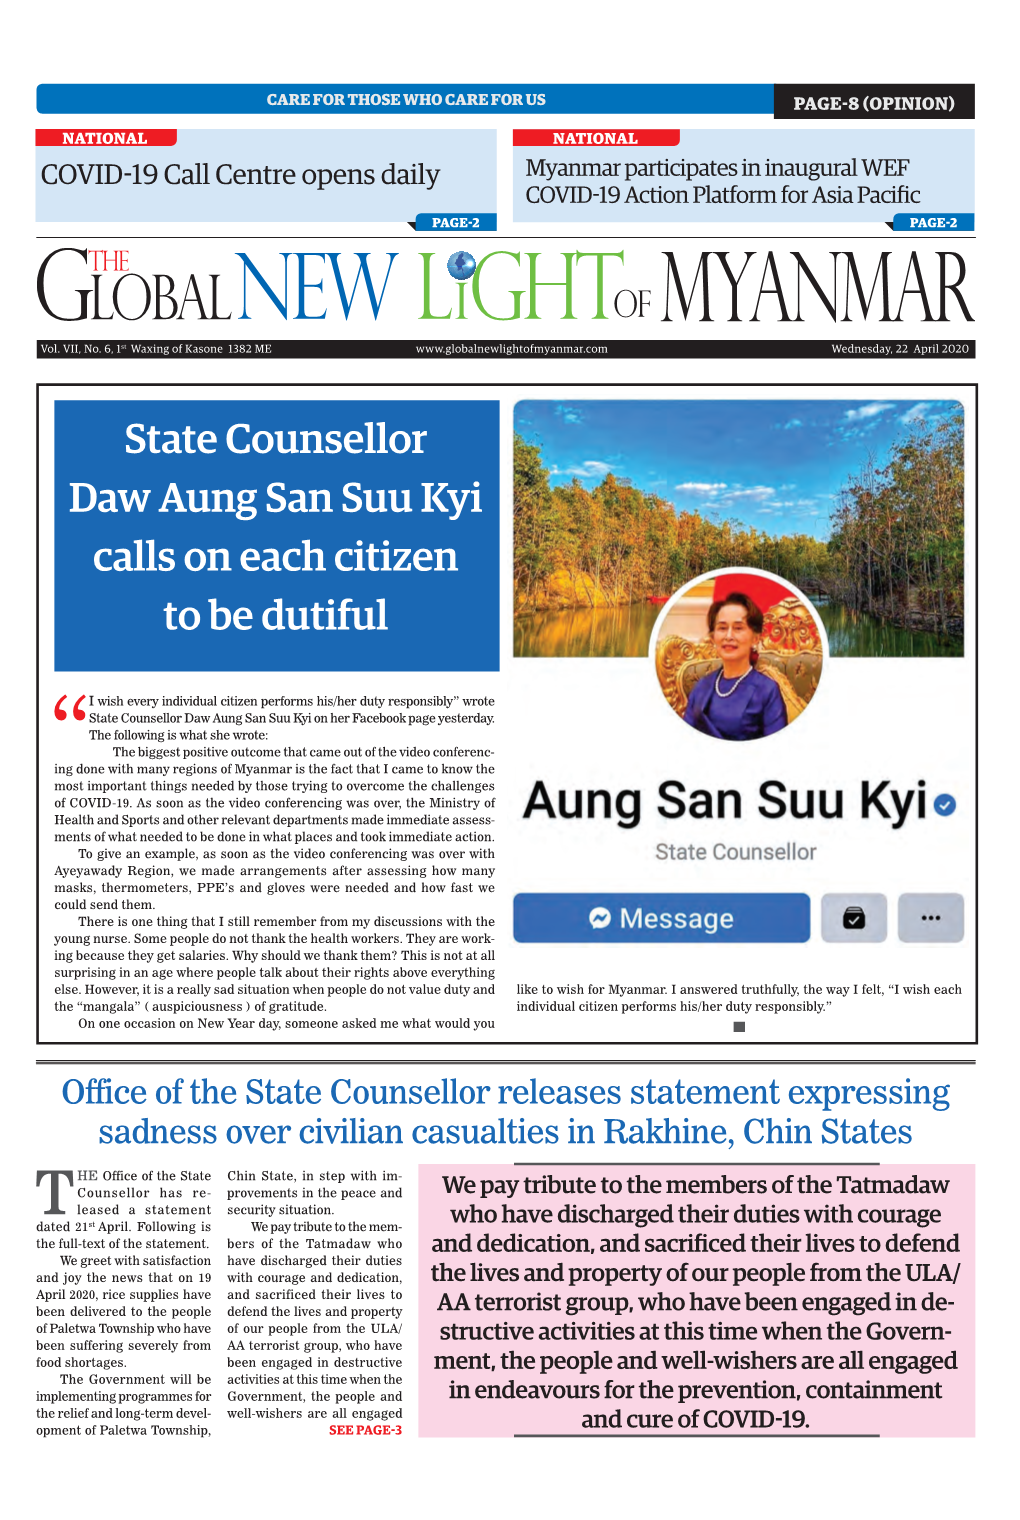 State Counsellor Daw Aung San Suu Kyi Calls on Each Citizen to Be Dutiful